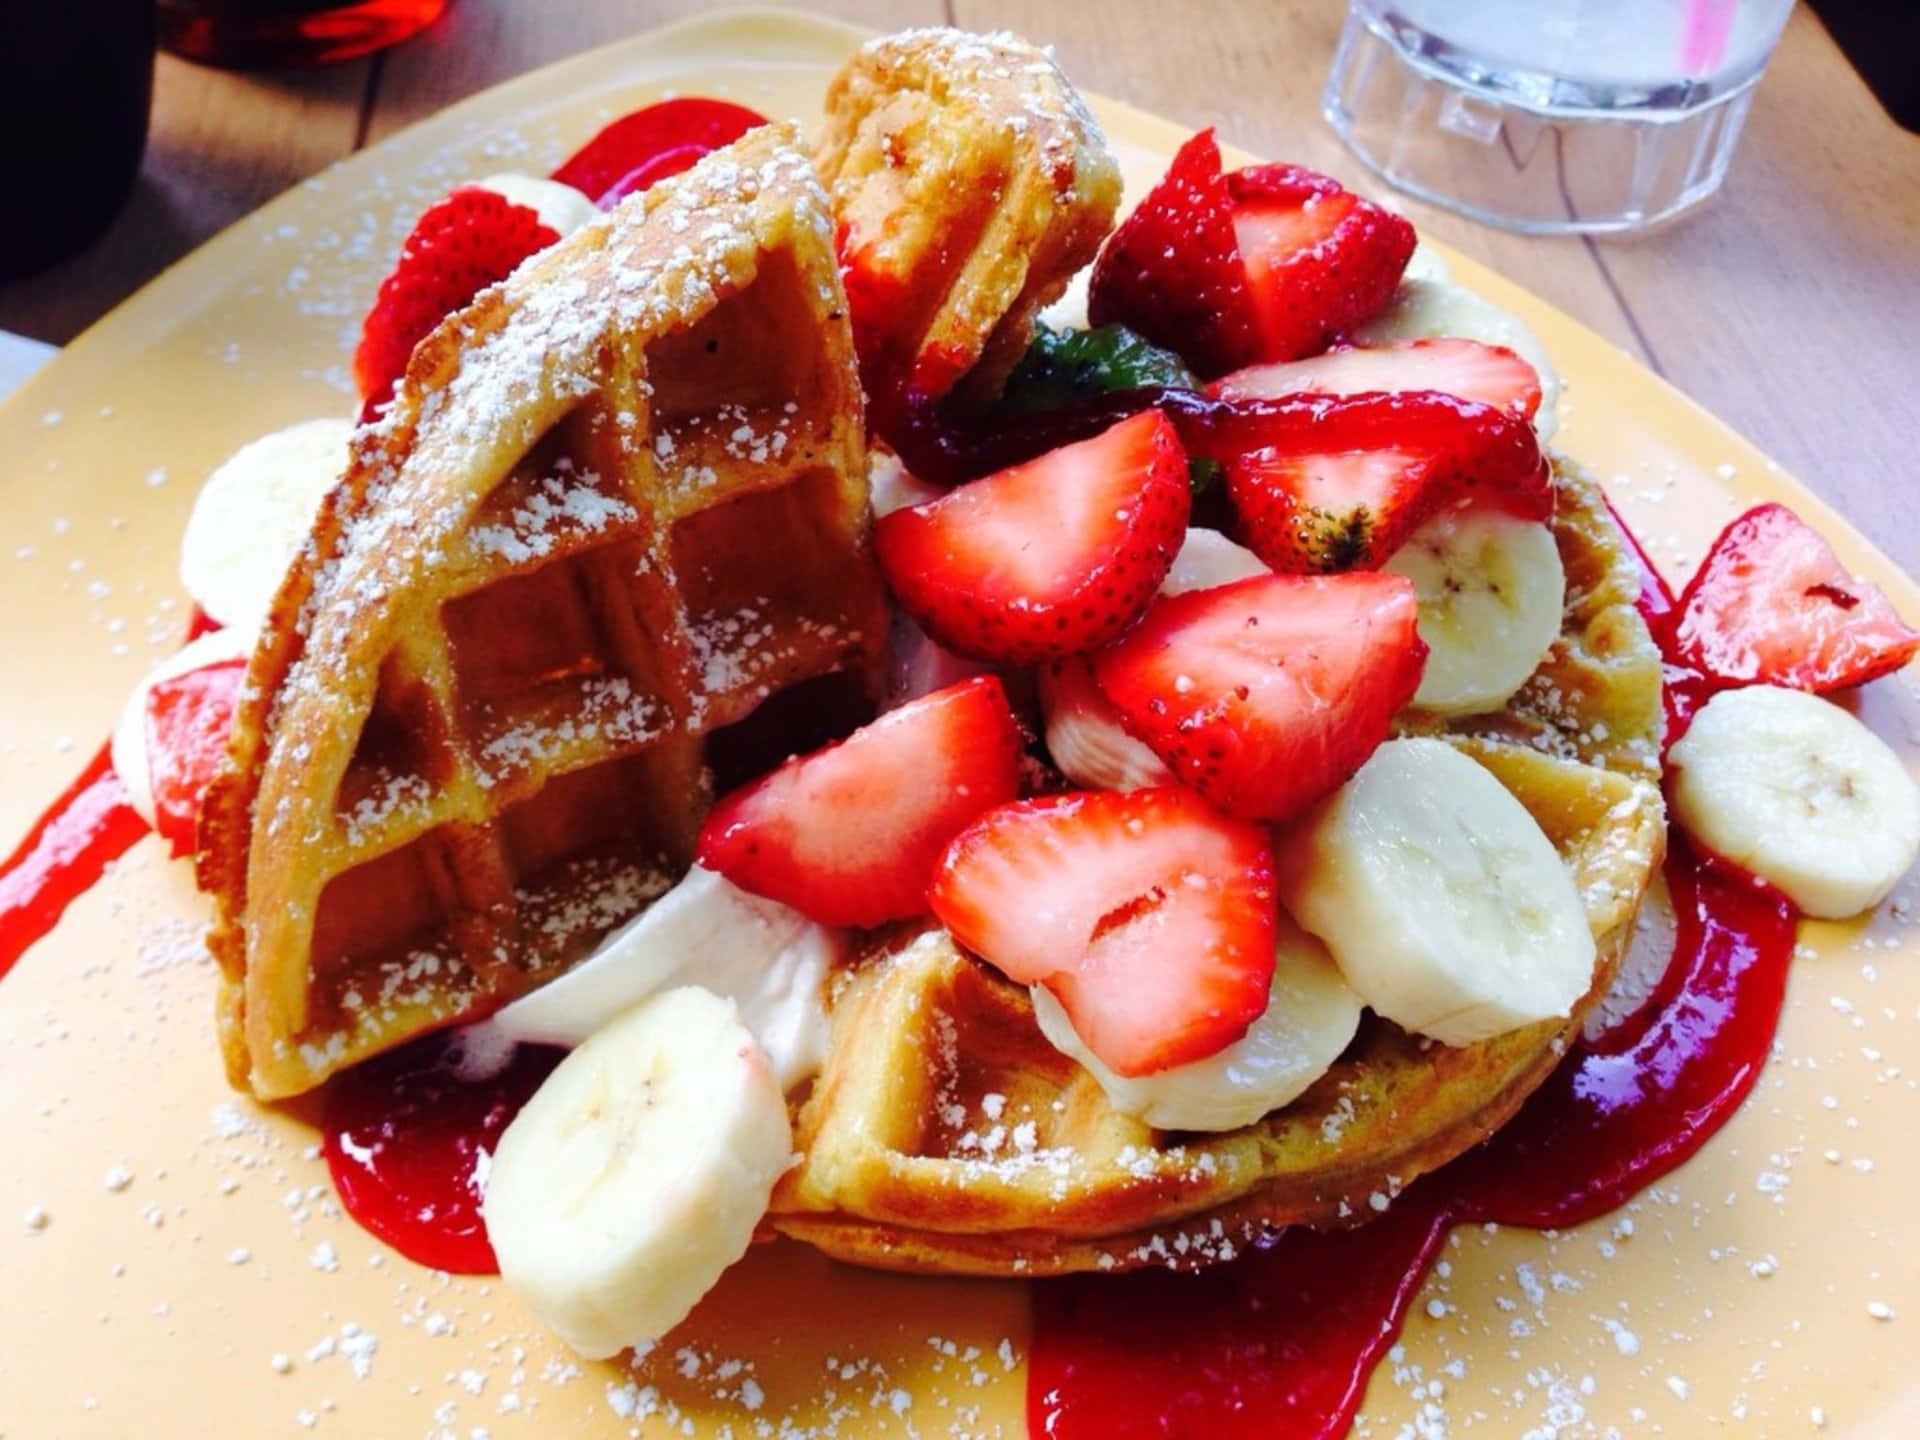 Enjoy a delicious golden-brown waffle topped with cocoa or hazelnut spread.